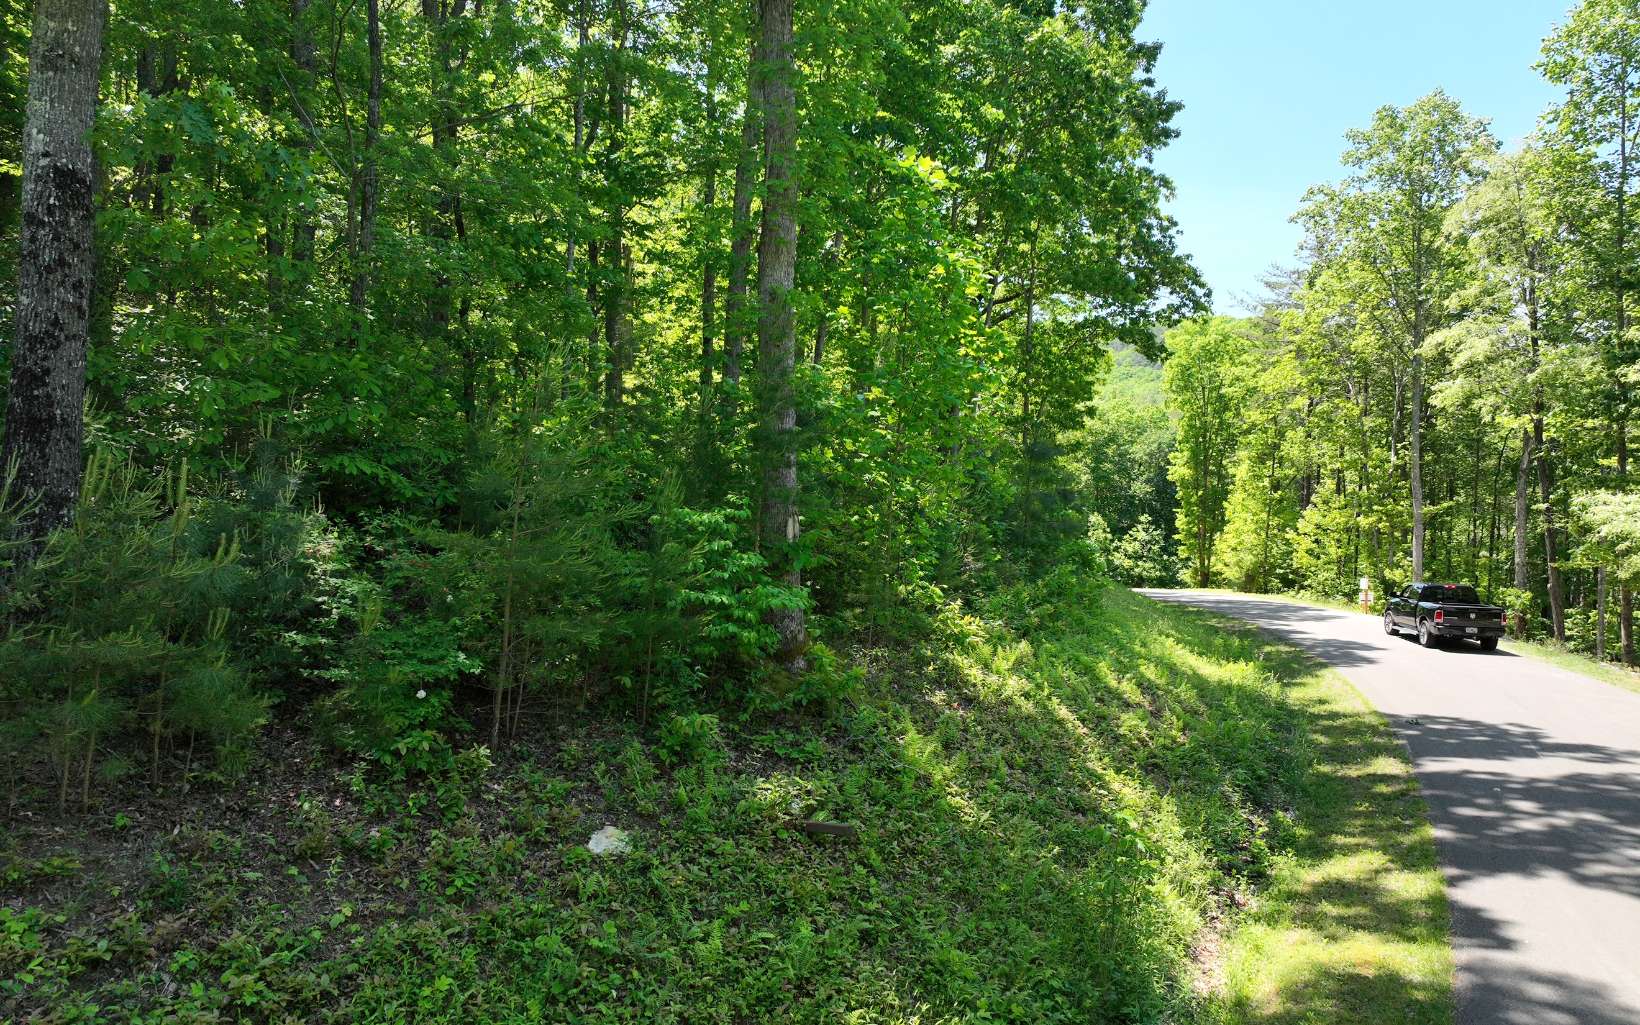 Rolling terrain on Mountain lot with natural springhead! This lot perfectly located close to the lake and walking trails; just a short walk to high waterfalls and a path to the lake! Approaching the lot, near the right boundary you'll find an old logging road. Just a short jaunt up the hill you'll see lots of building spots to choose from! Build in the middle for lots of elbow room, or build towards the top to make the most of seasonal mountain views! Buy now, build later! Close to the front gate, underground electric, cable, phone and a perc test on file make this an easy decision! You'll love the peace and serenity of Falling Waters! Gated, HOA, no RVs or mobile homes.